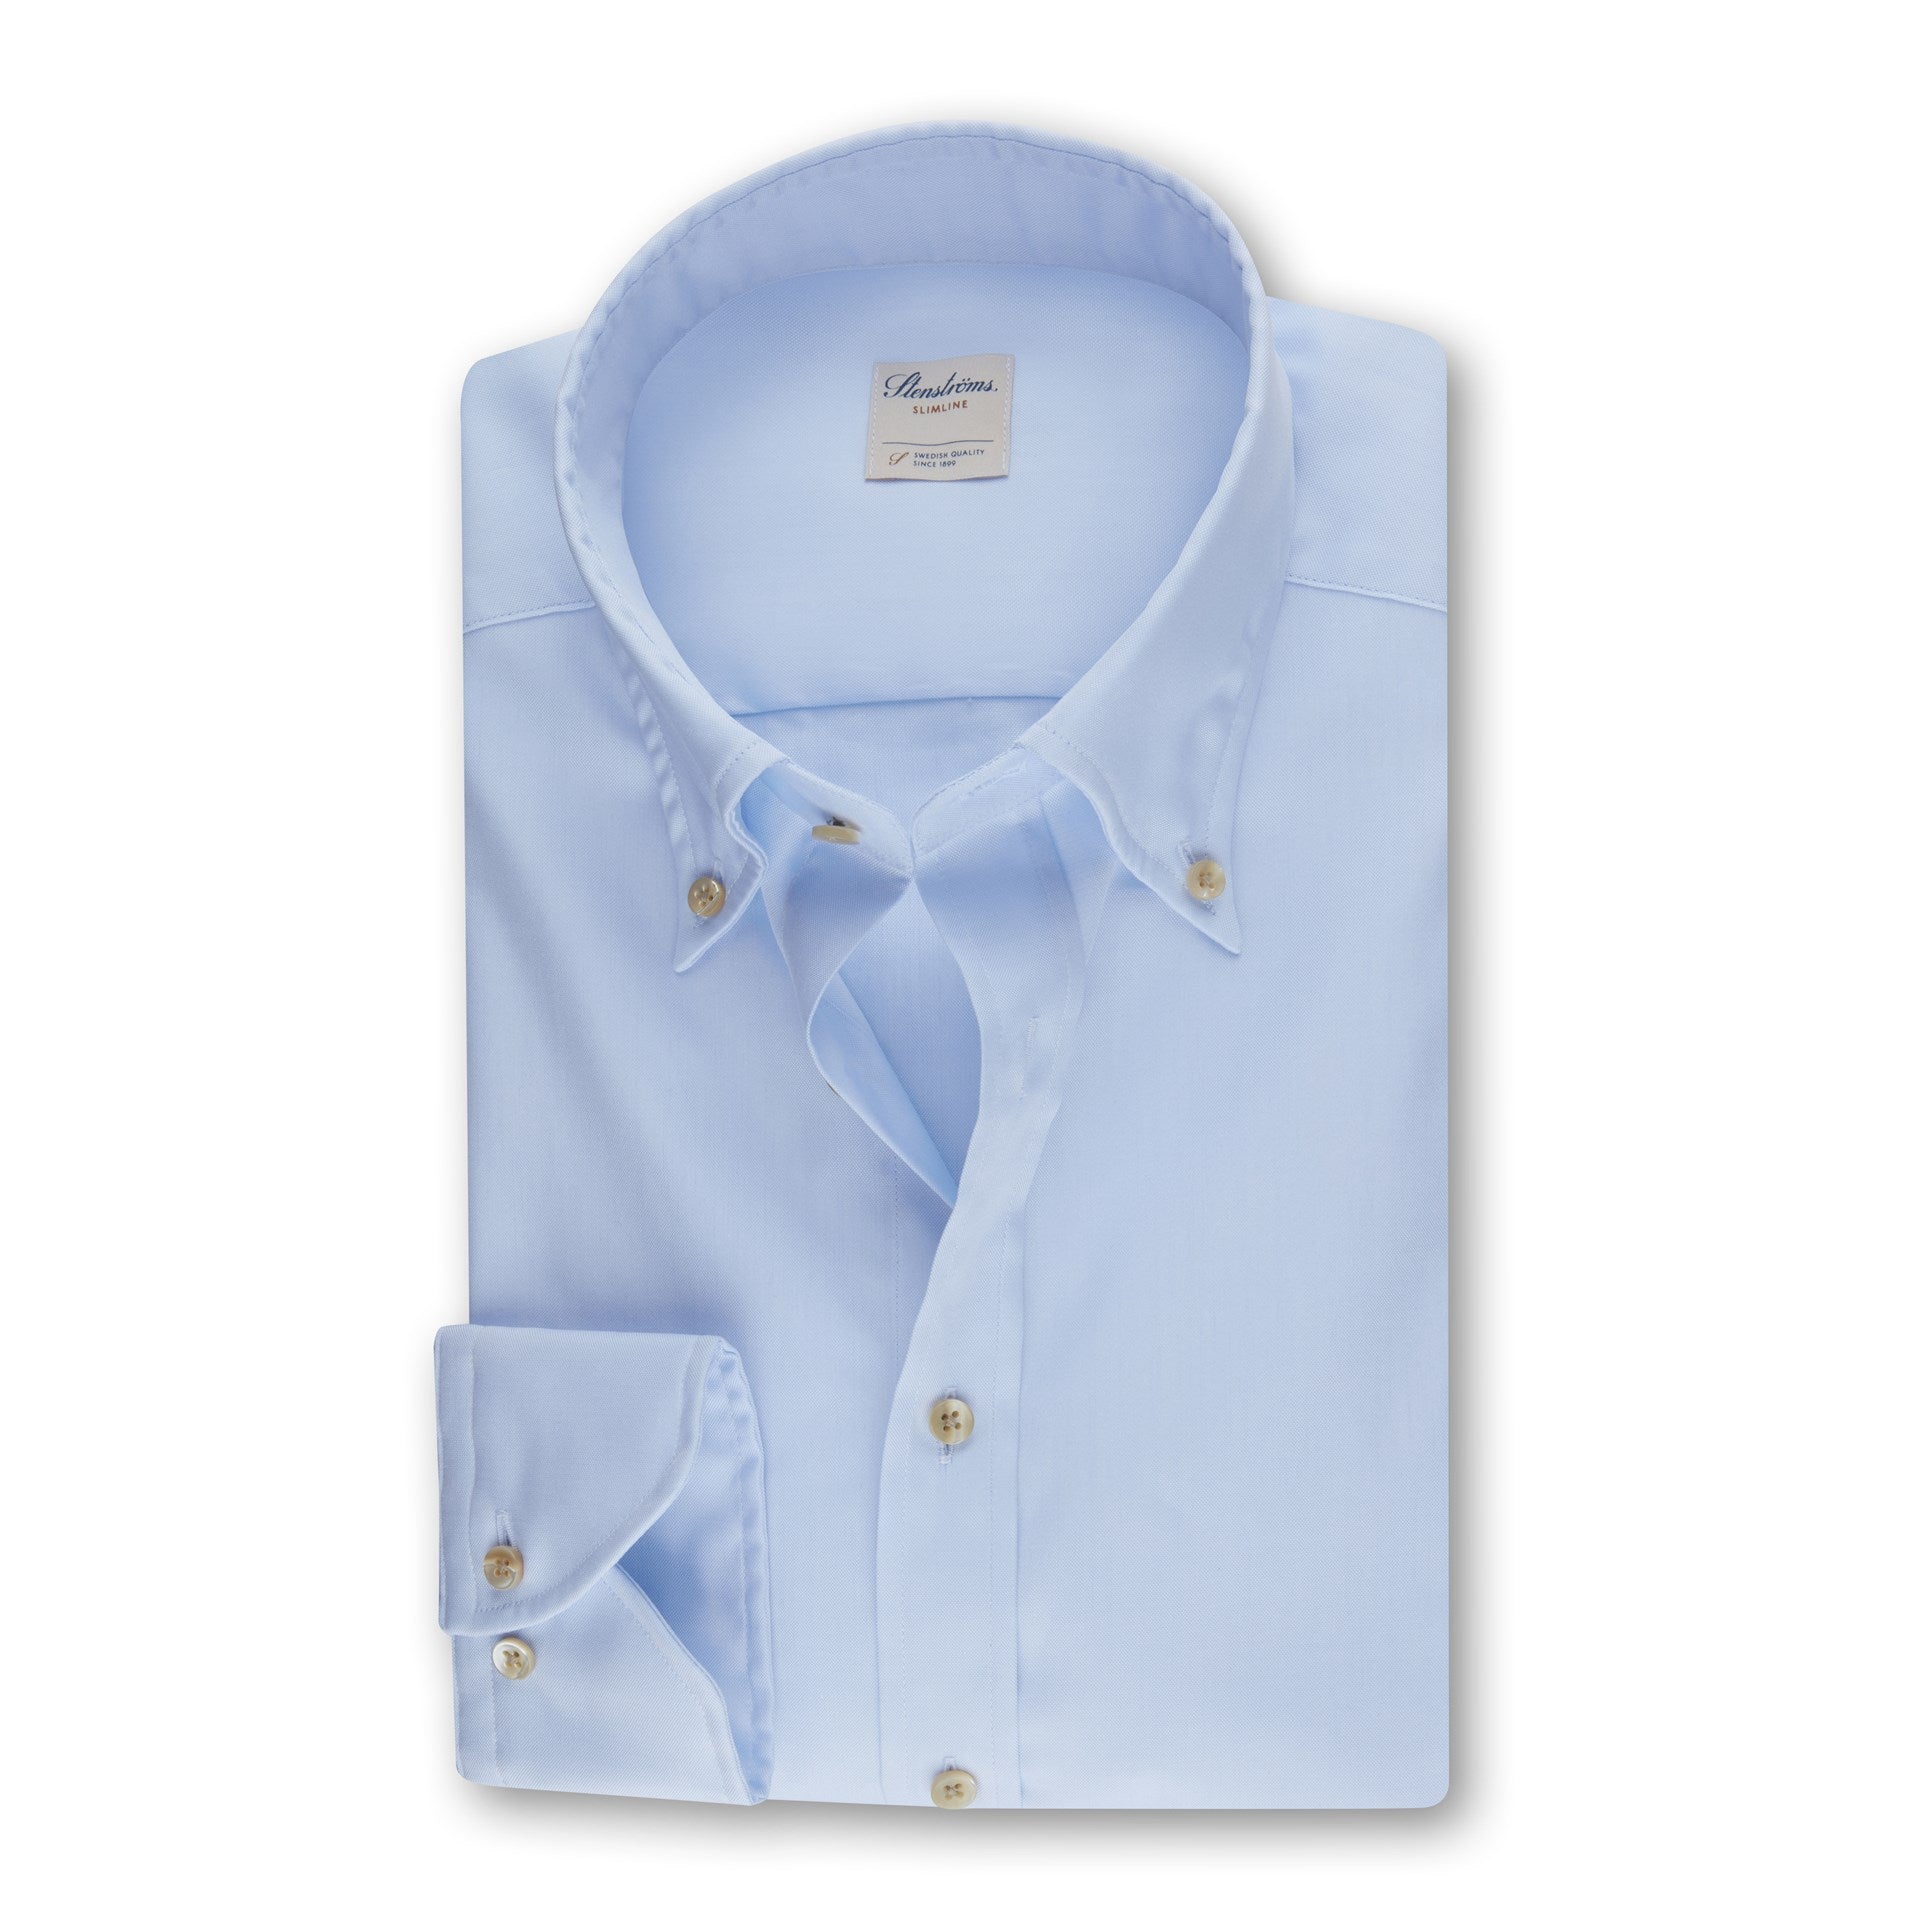 Casual Light Blue Oxford Shirt - Fitted Body Stenstroms